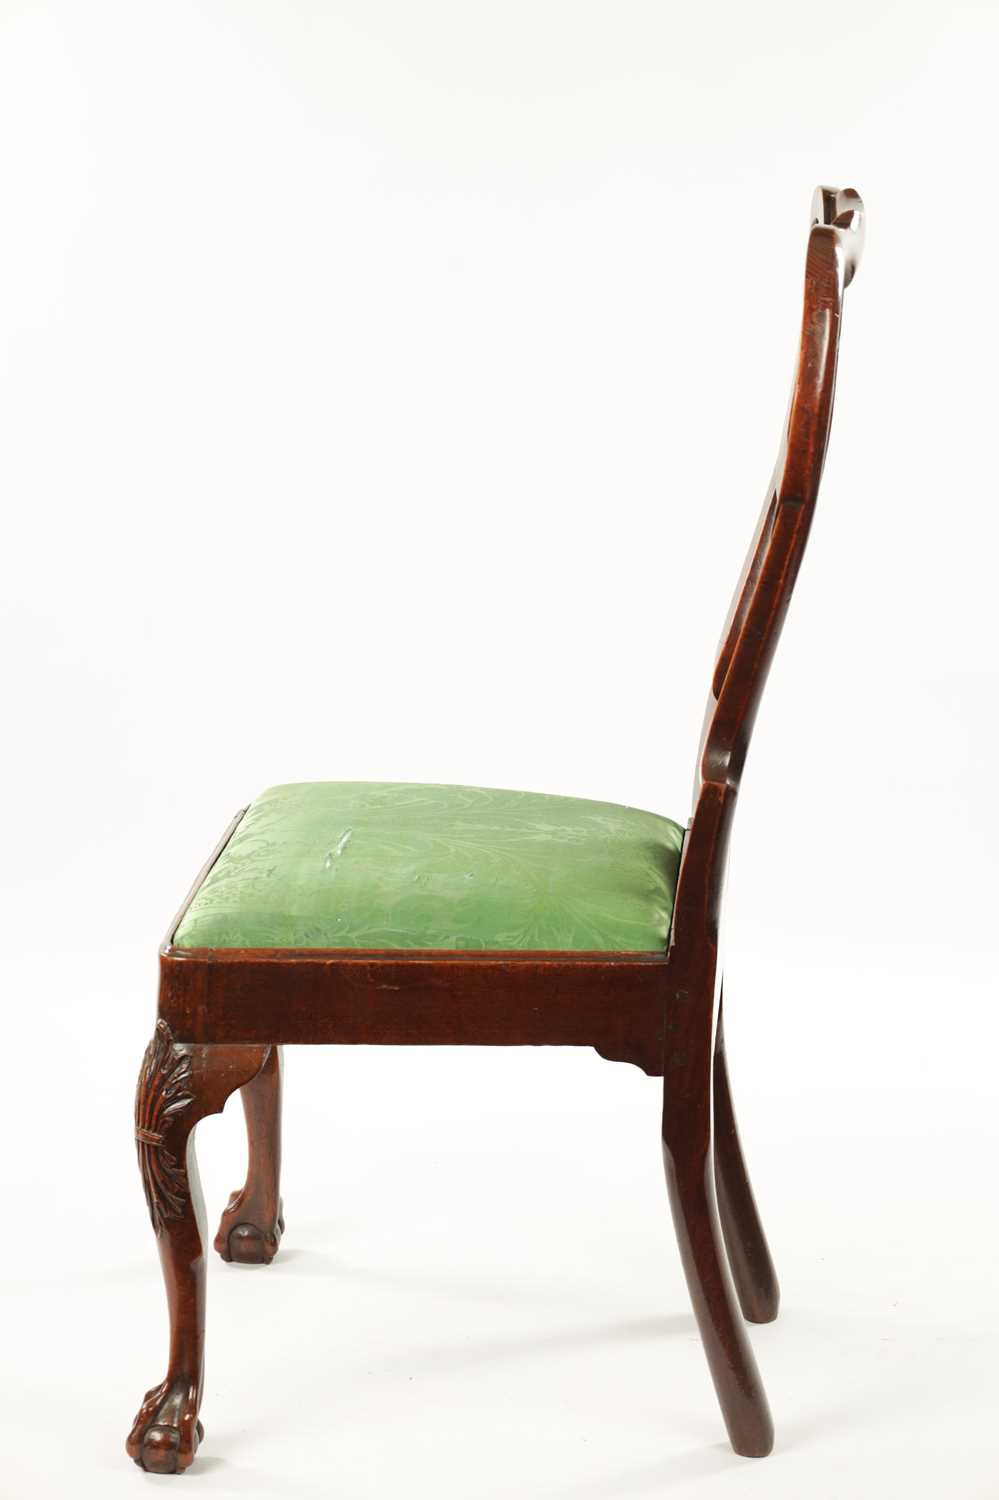 A MID 18TH CENTURY WALNUT SIDE CHAIR IN THE MANNER OF ROBERT MAINWARING - Image 6 of 9